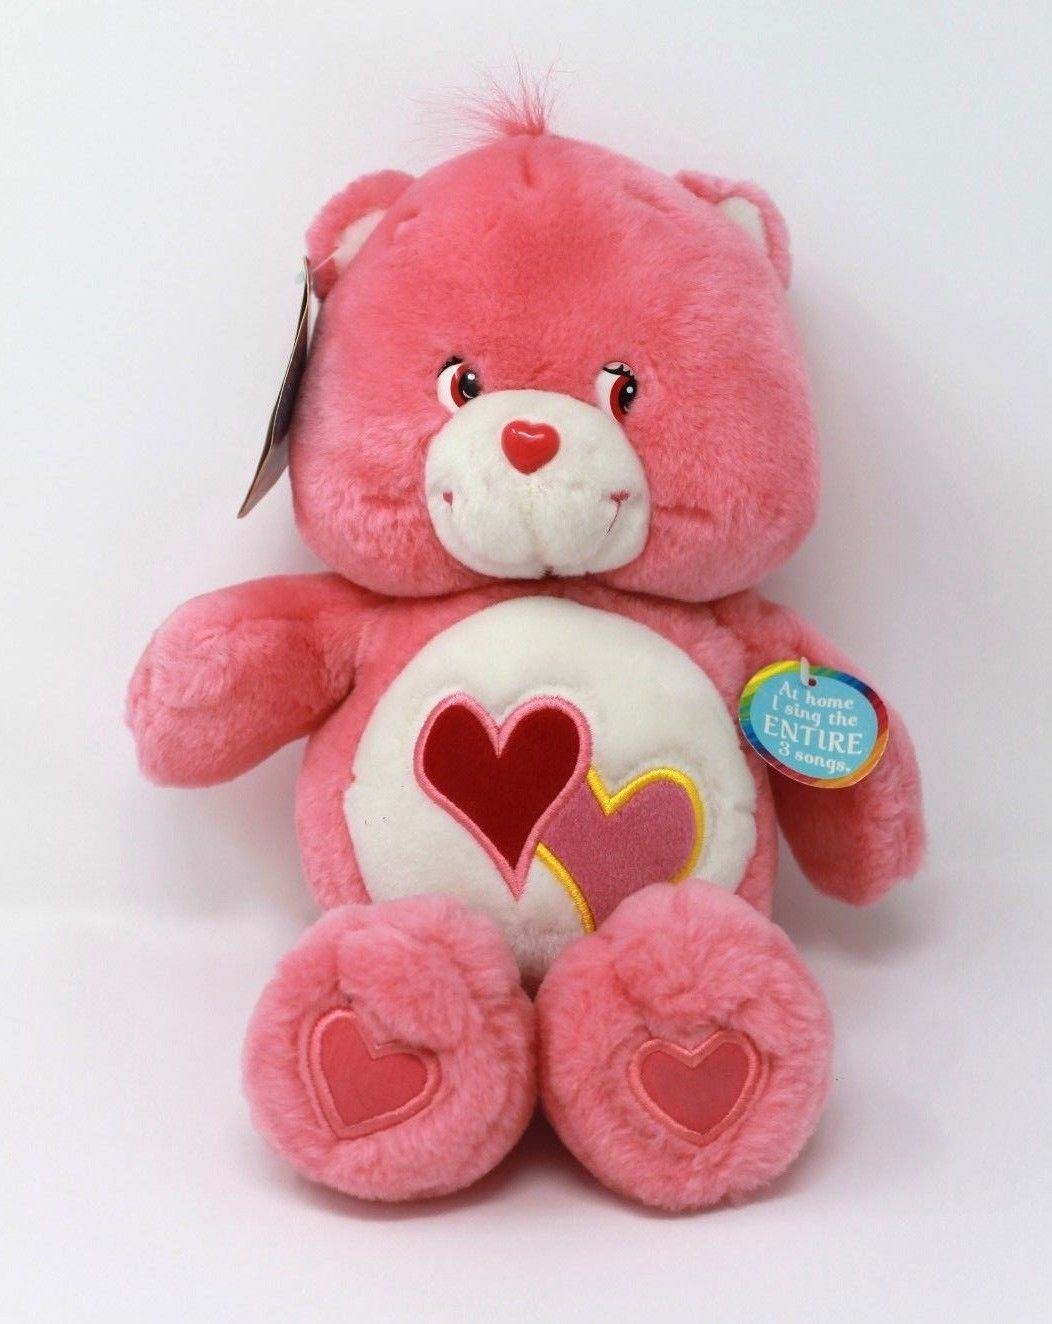 Care Bears Interactive Singing Love-A-Lot Bear Plush Pink Hearts 2003 NEW w/Tag